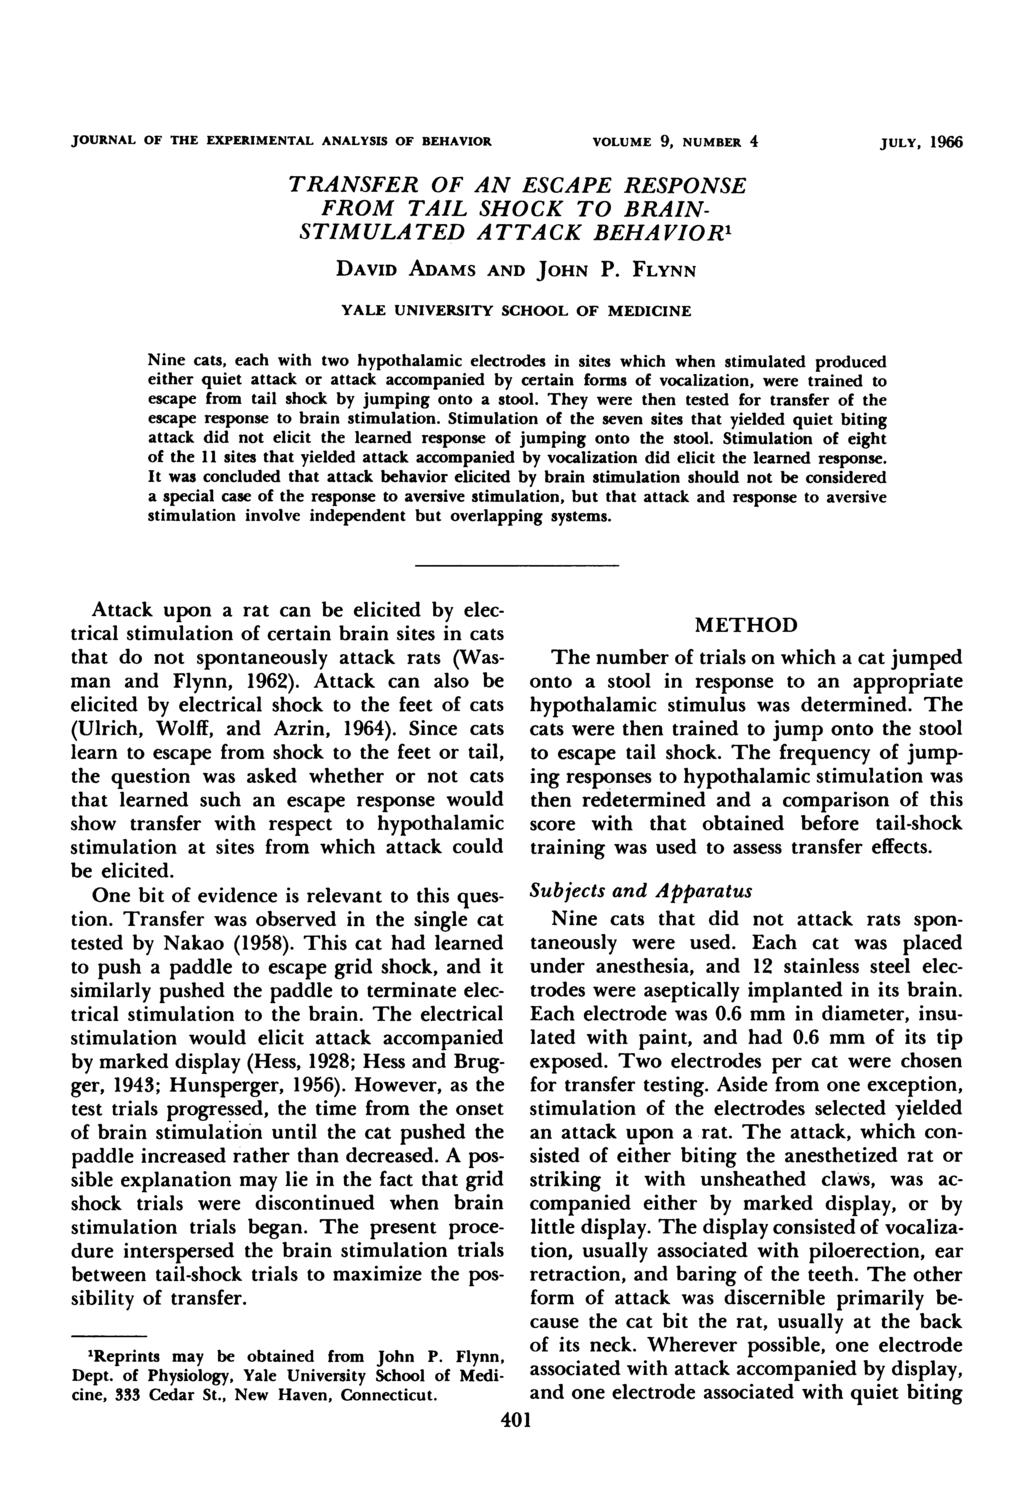 JOURNAL OF THE EXPERIMENTAL ANALYSIS OF BEHAVIOR TRANSFER OF AN ESCAPE RESPONSE FROM TAIL SHOCK TO BRAIN- STIMULA TED ATTACK BEHAVIOR' DAVID ADAMS AND JOHN P.